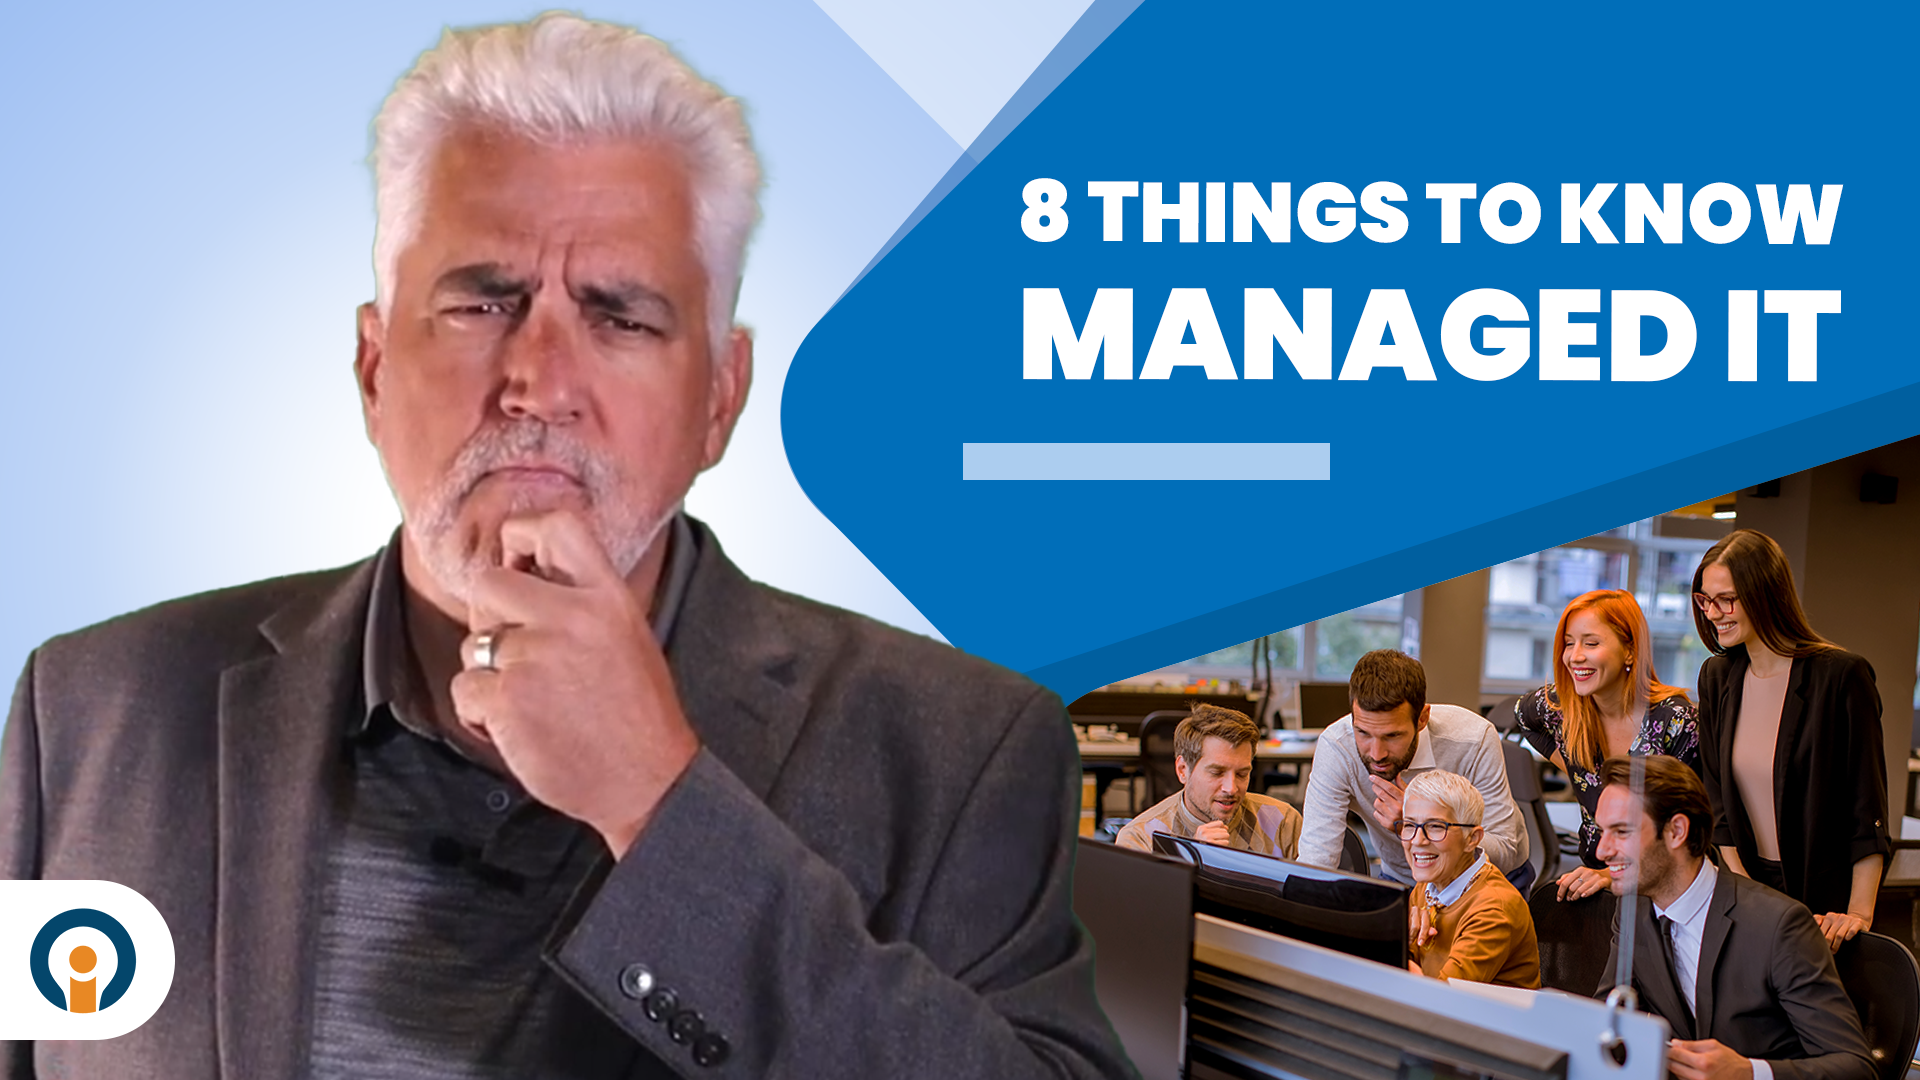 Top Things to Know Managed IT